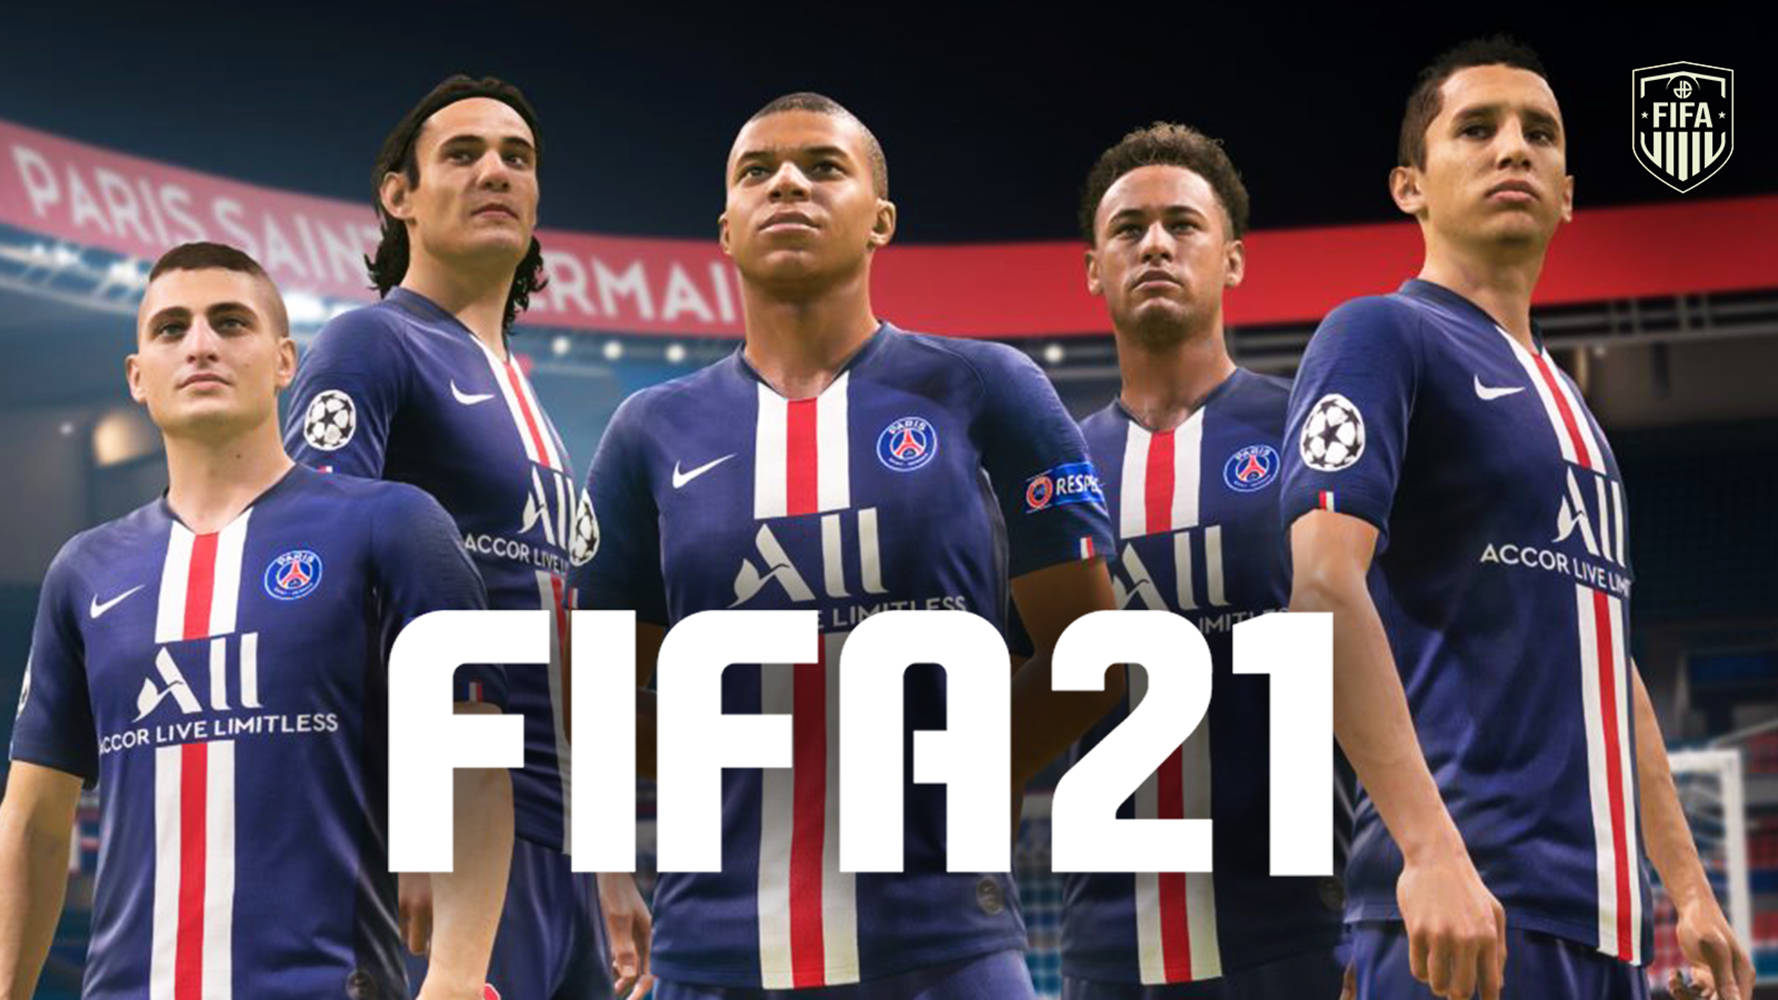 FIFA 21 Wallpapers